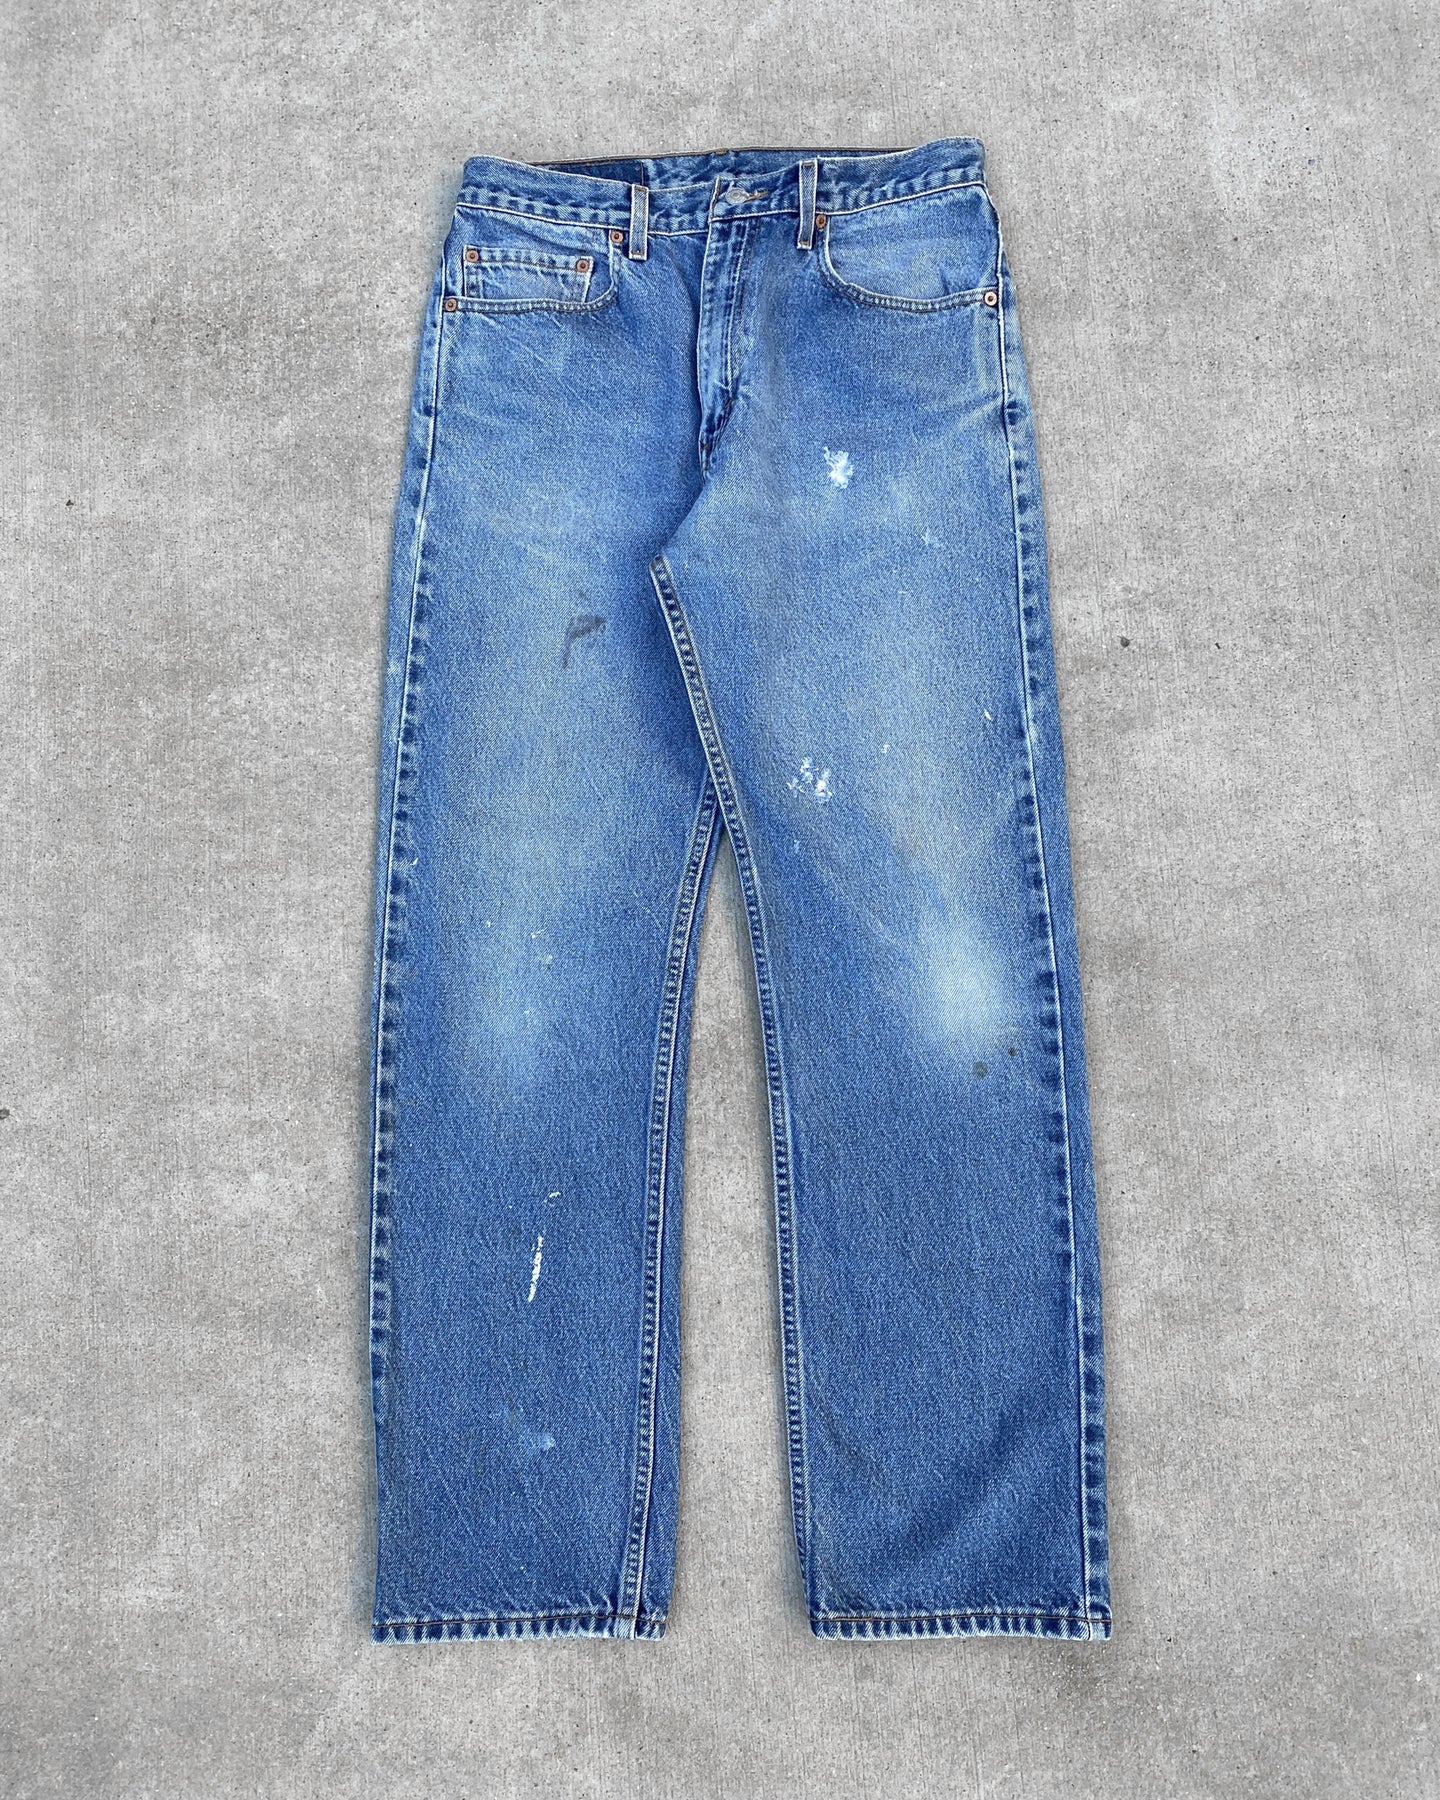 1990s Levi's Well Worn Distressed 505 - Size 32 x 31